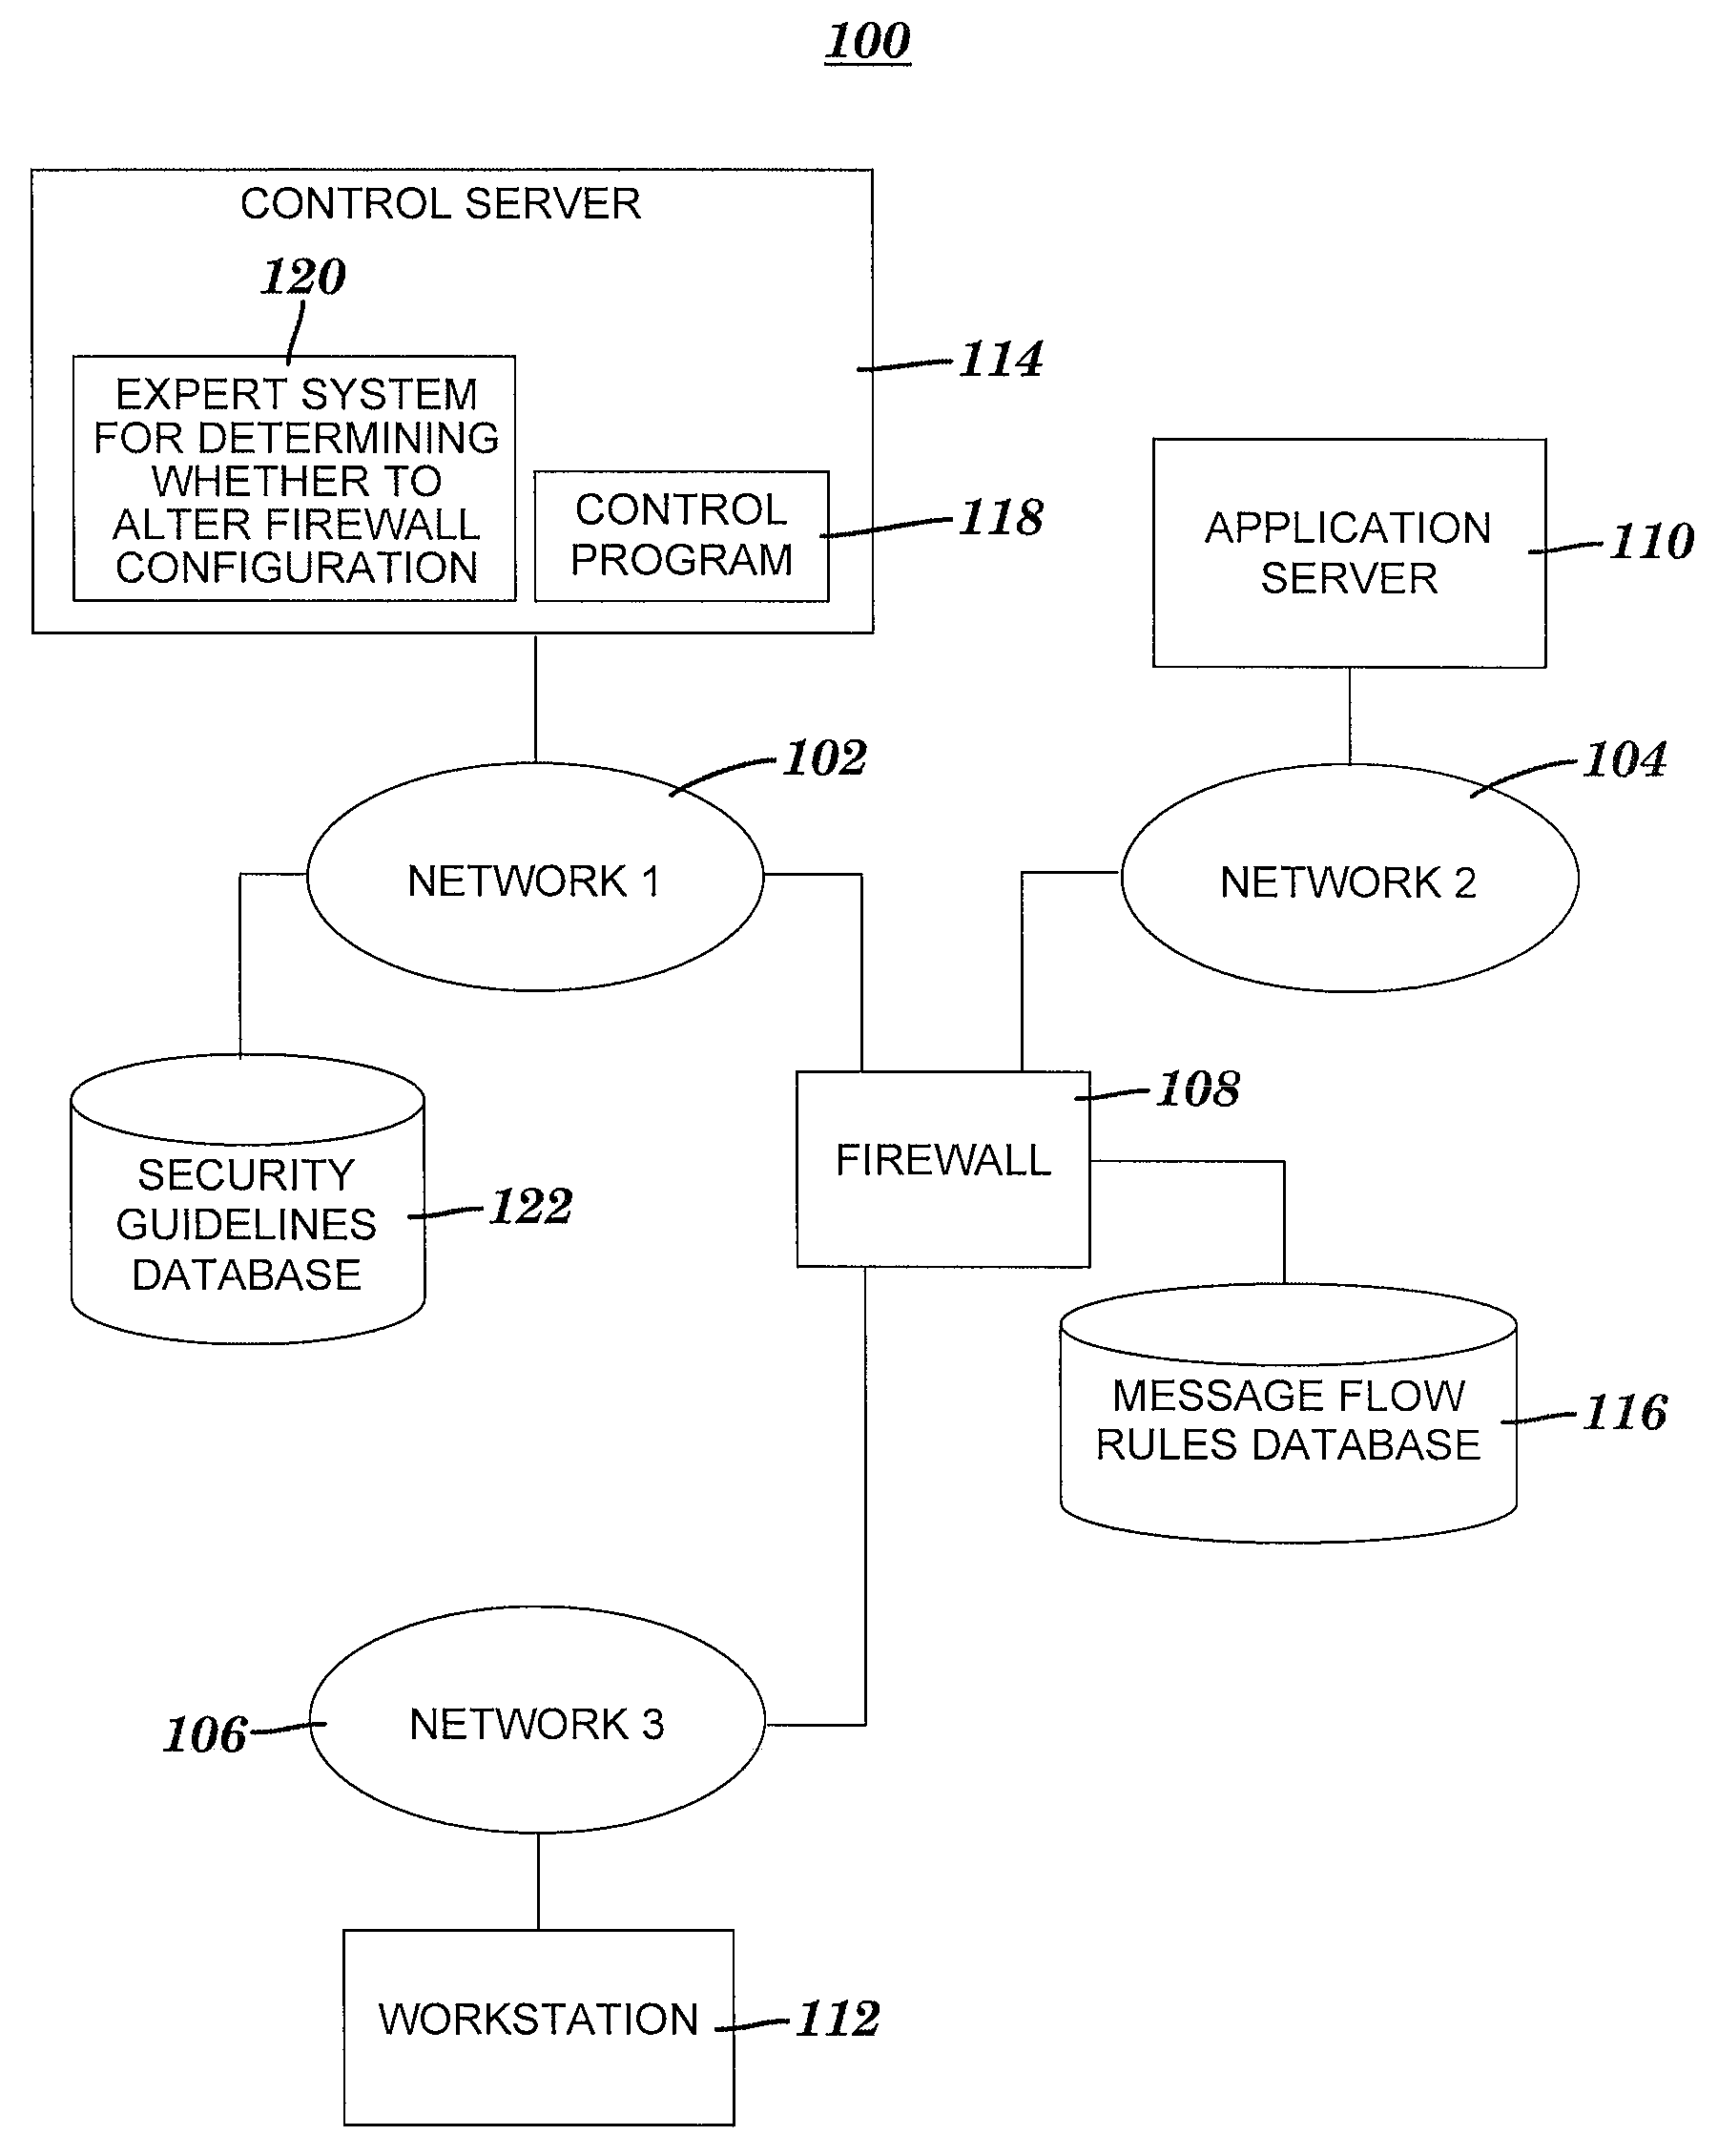 Method and sysem for utilizing an expert system to determine whether to alter a firewall configuration